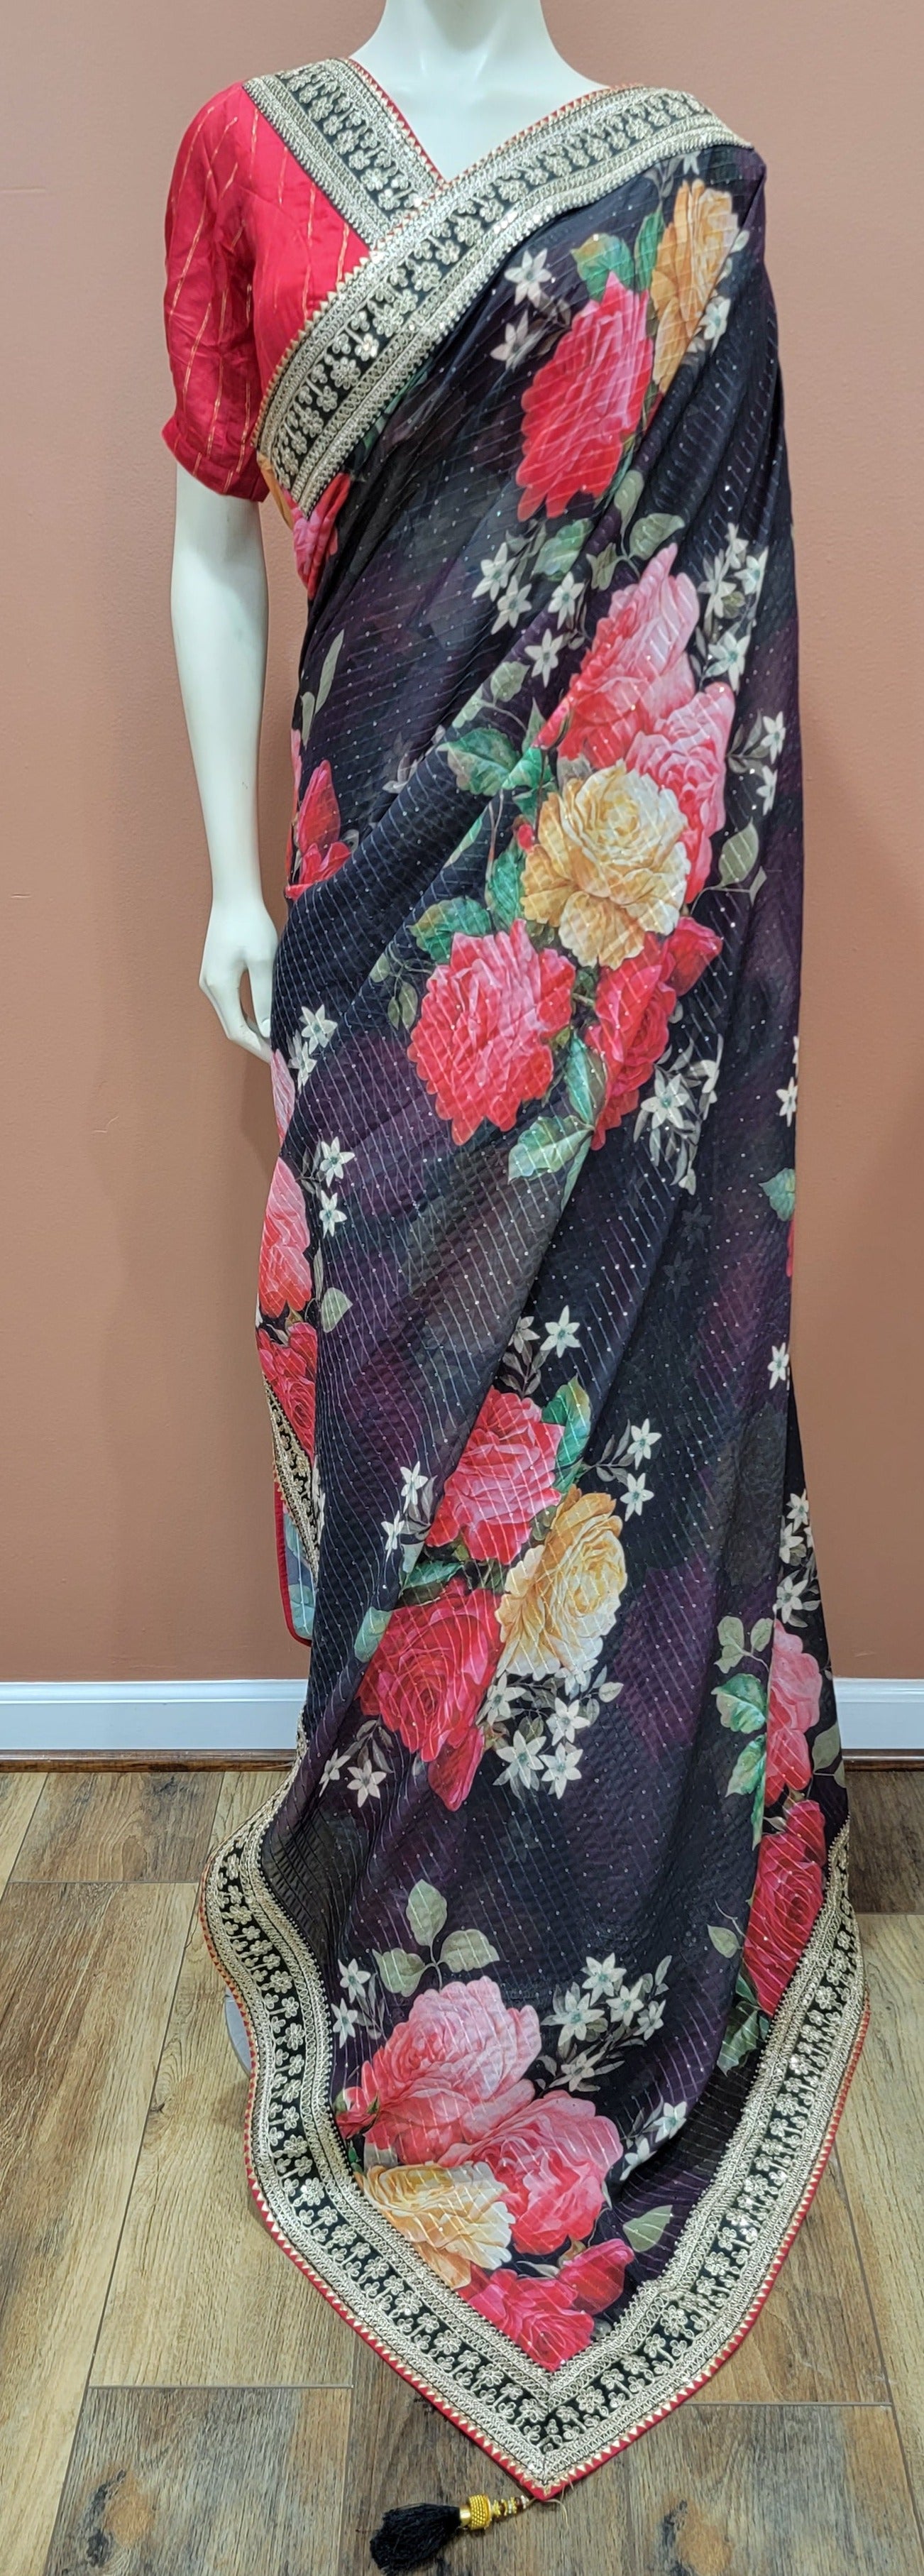 Chinon Sequence Saree W/ Blouse Collection